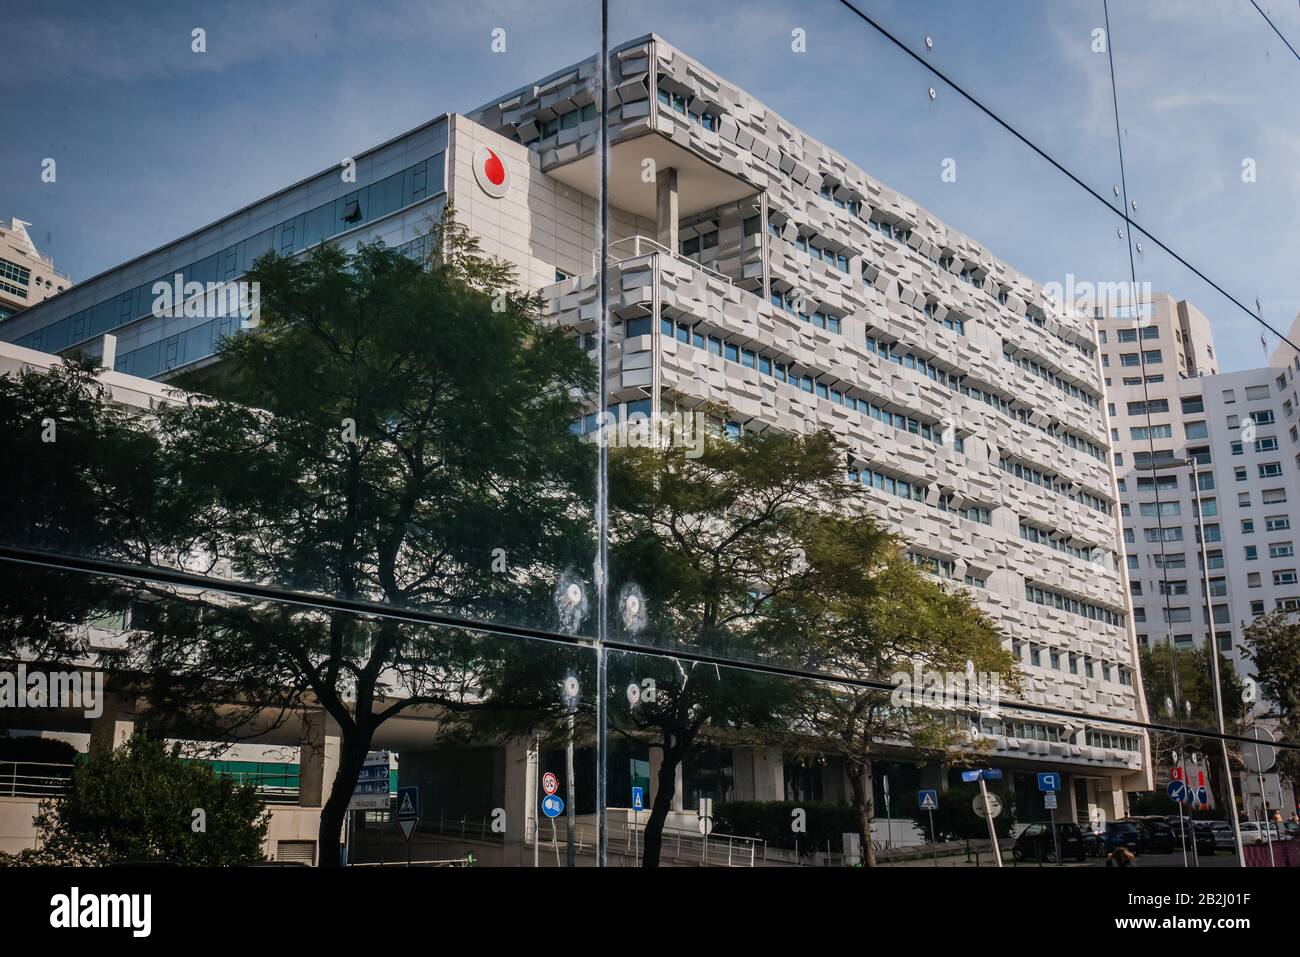 Vodafone Portugal head office located in the Parque das Naoces, designed by Alexandre Burmester and Jose Carlos Goncalves, constructed in 2002, was aw Stock Photo